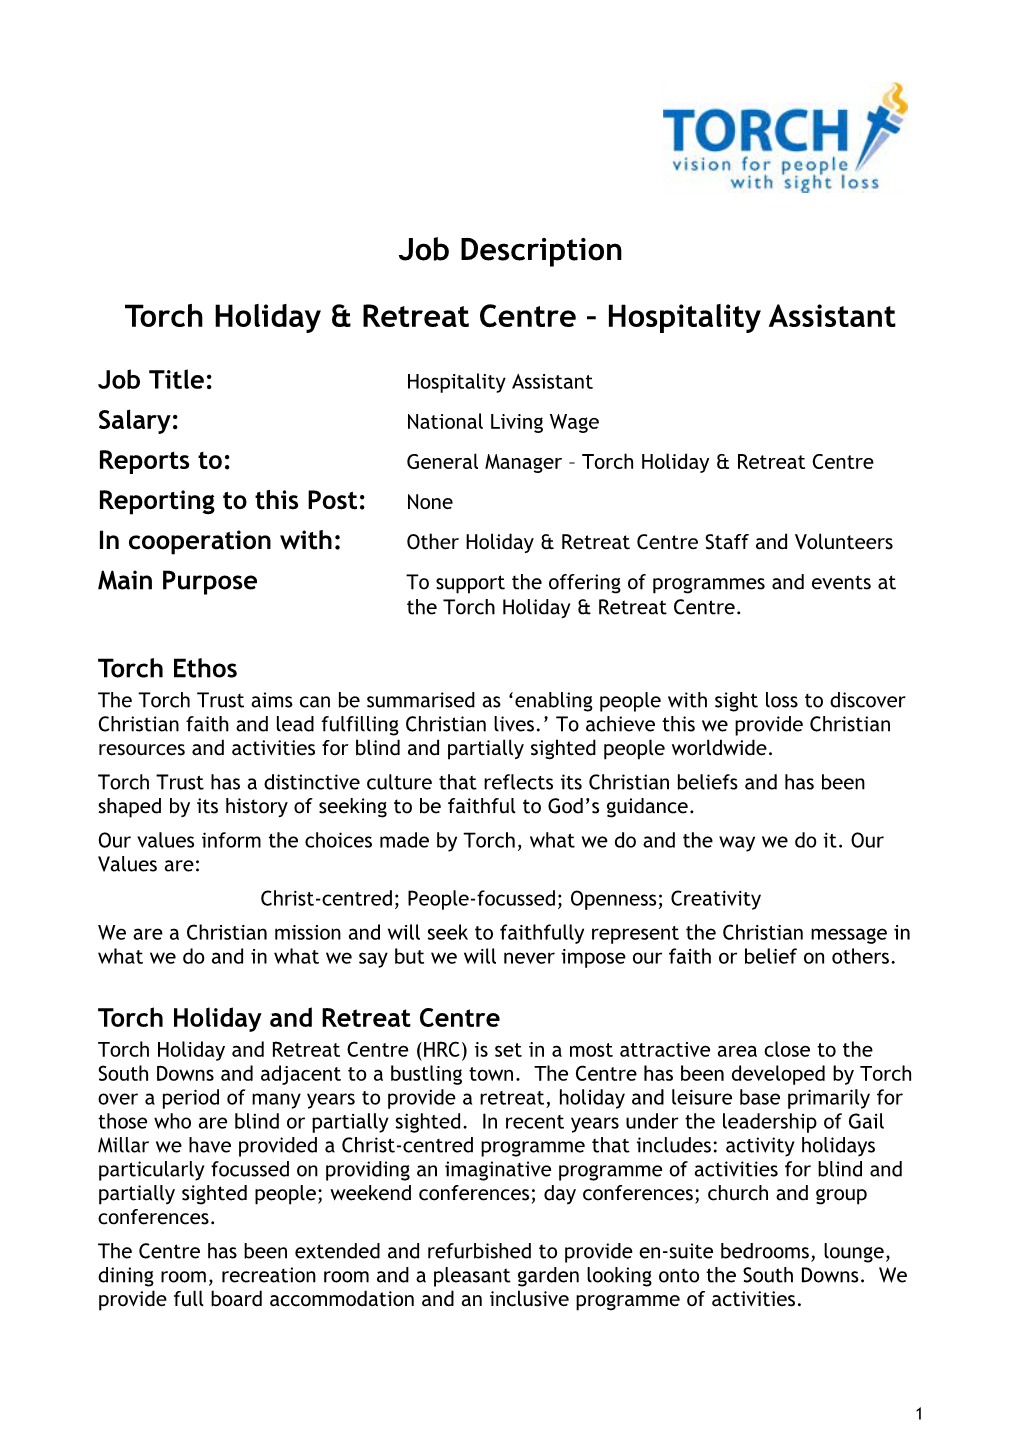 Torch Holiday & Retreat Centre Hospitality Assistant